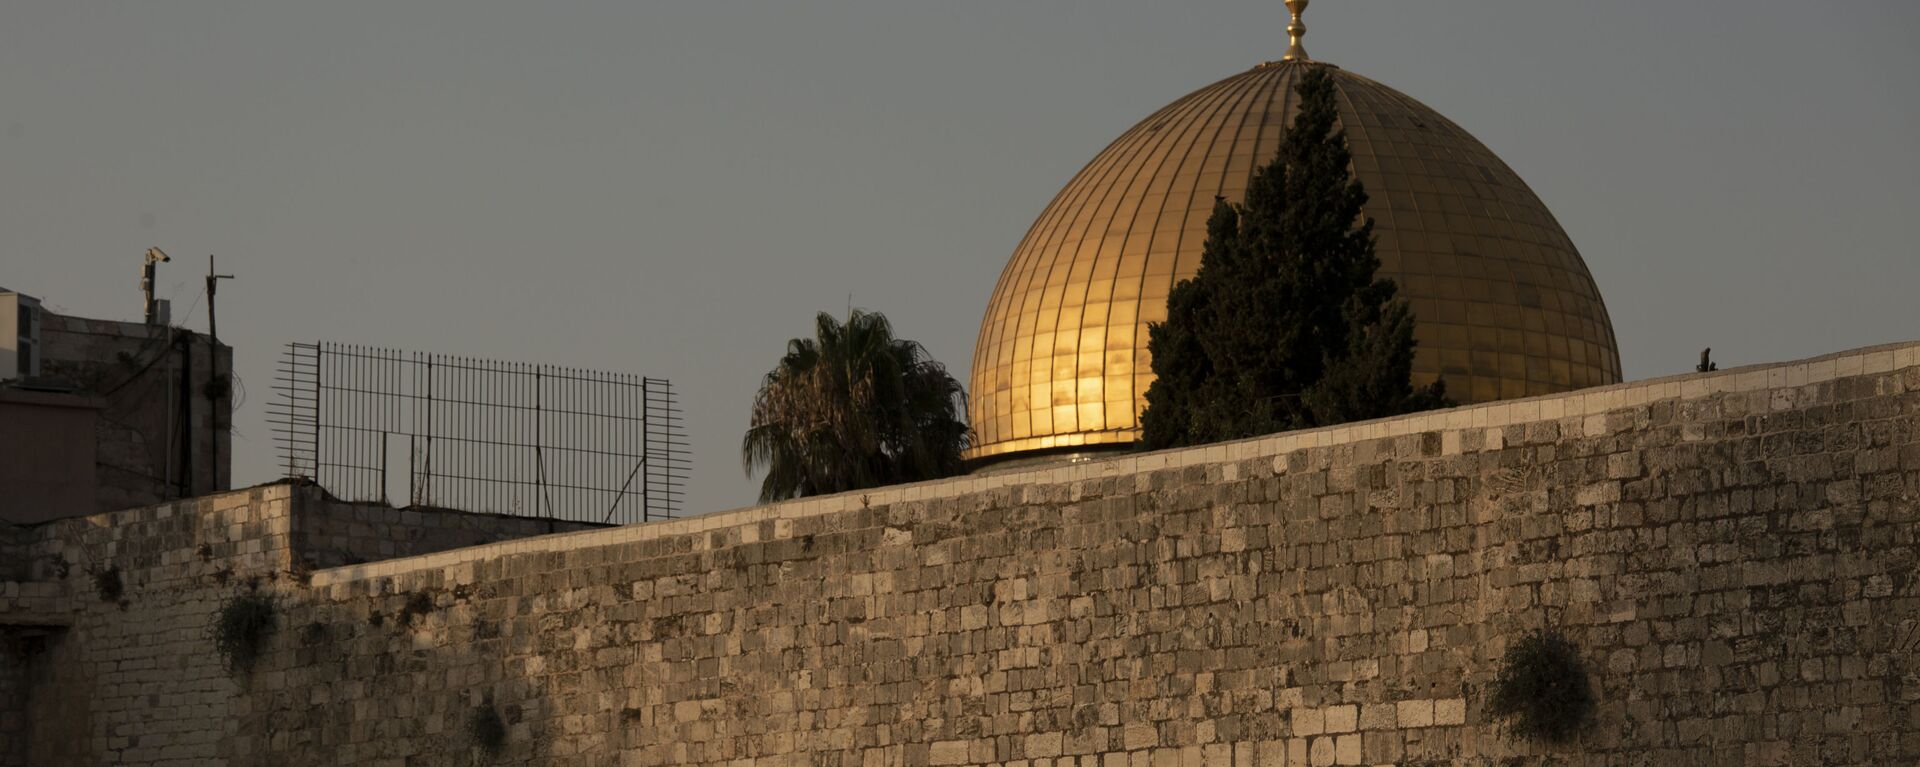 The Dome of the Rock mosque is seen above the Mughrabi Bridge, a wooden pedestrian bridge connecting the wall to the Al Aqsa Mosque compound, in Jerusalem's Old City, Tuesday, July 20, 2021. - Sputnik International, 1920, 21.04.2022